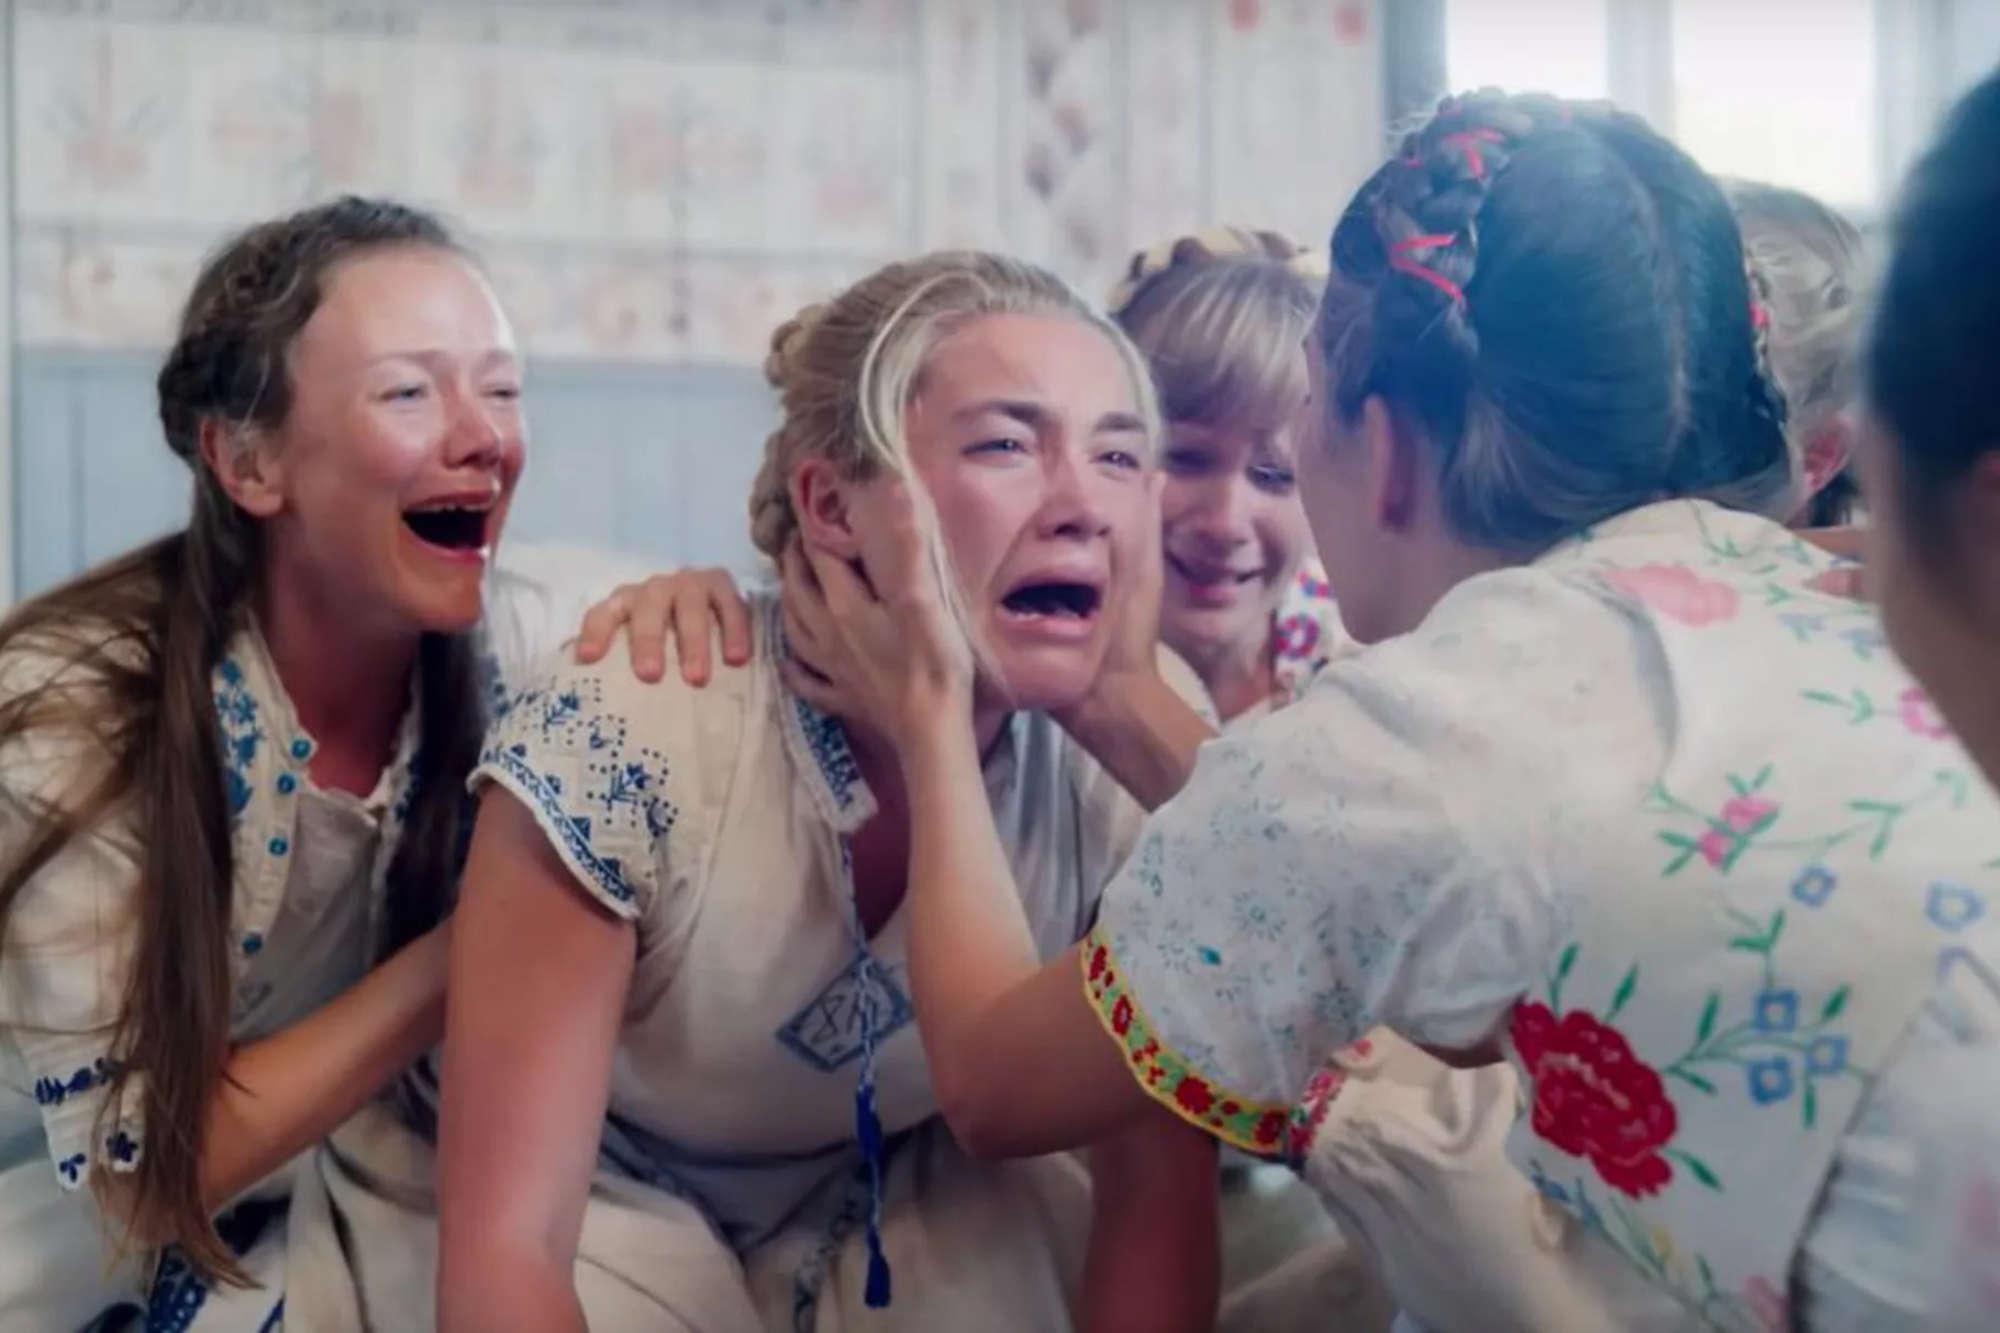 Screencap from Midsommar, one of several horror films discussed in the book "Labors of Fear."